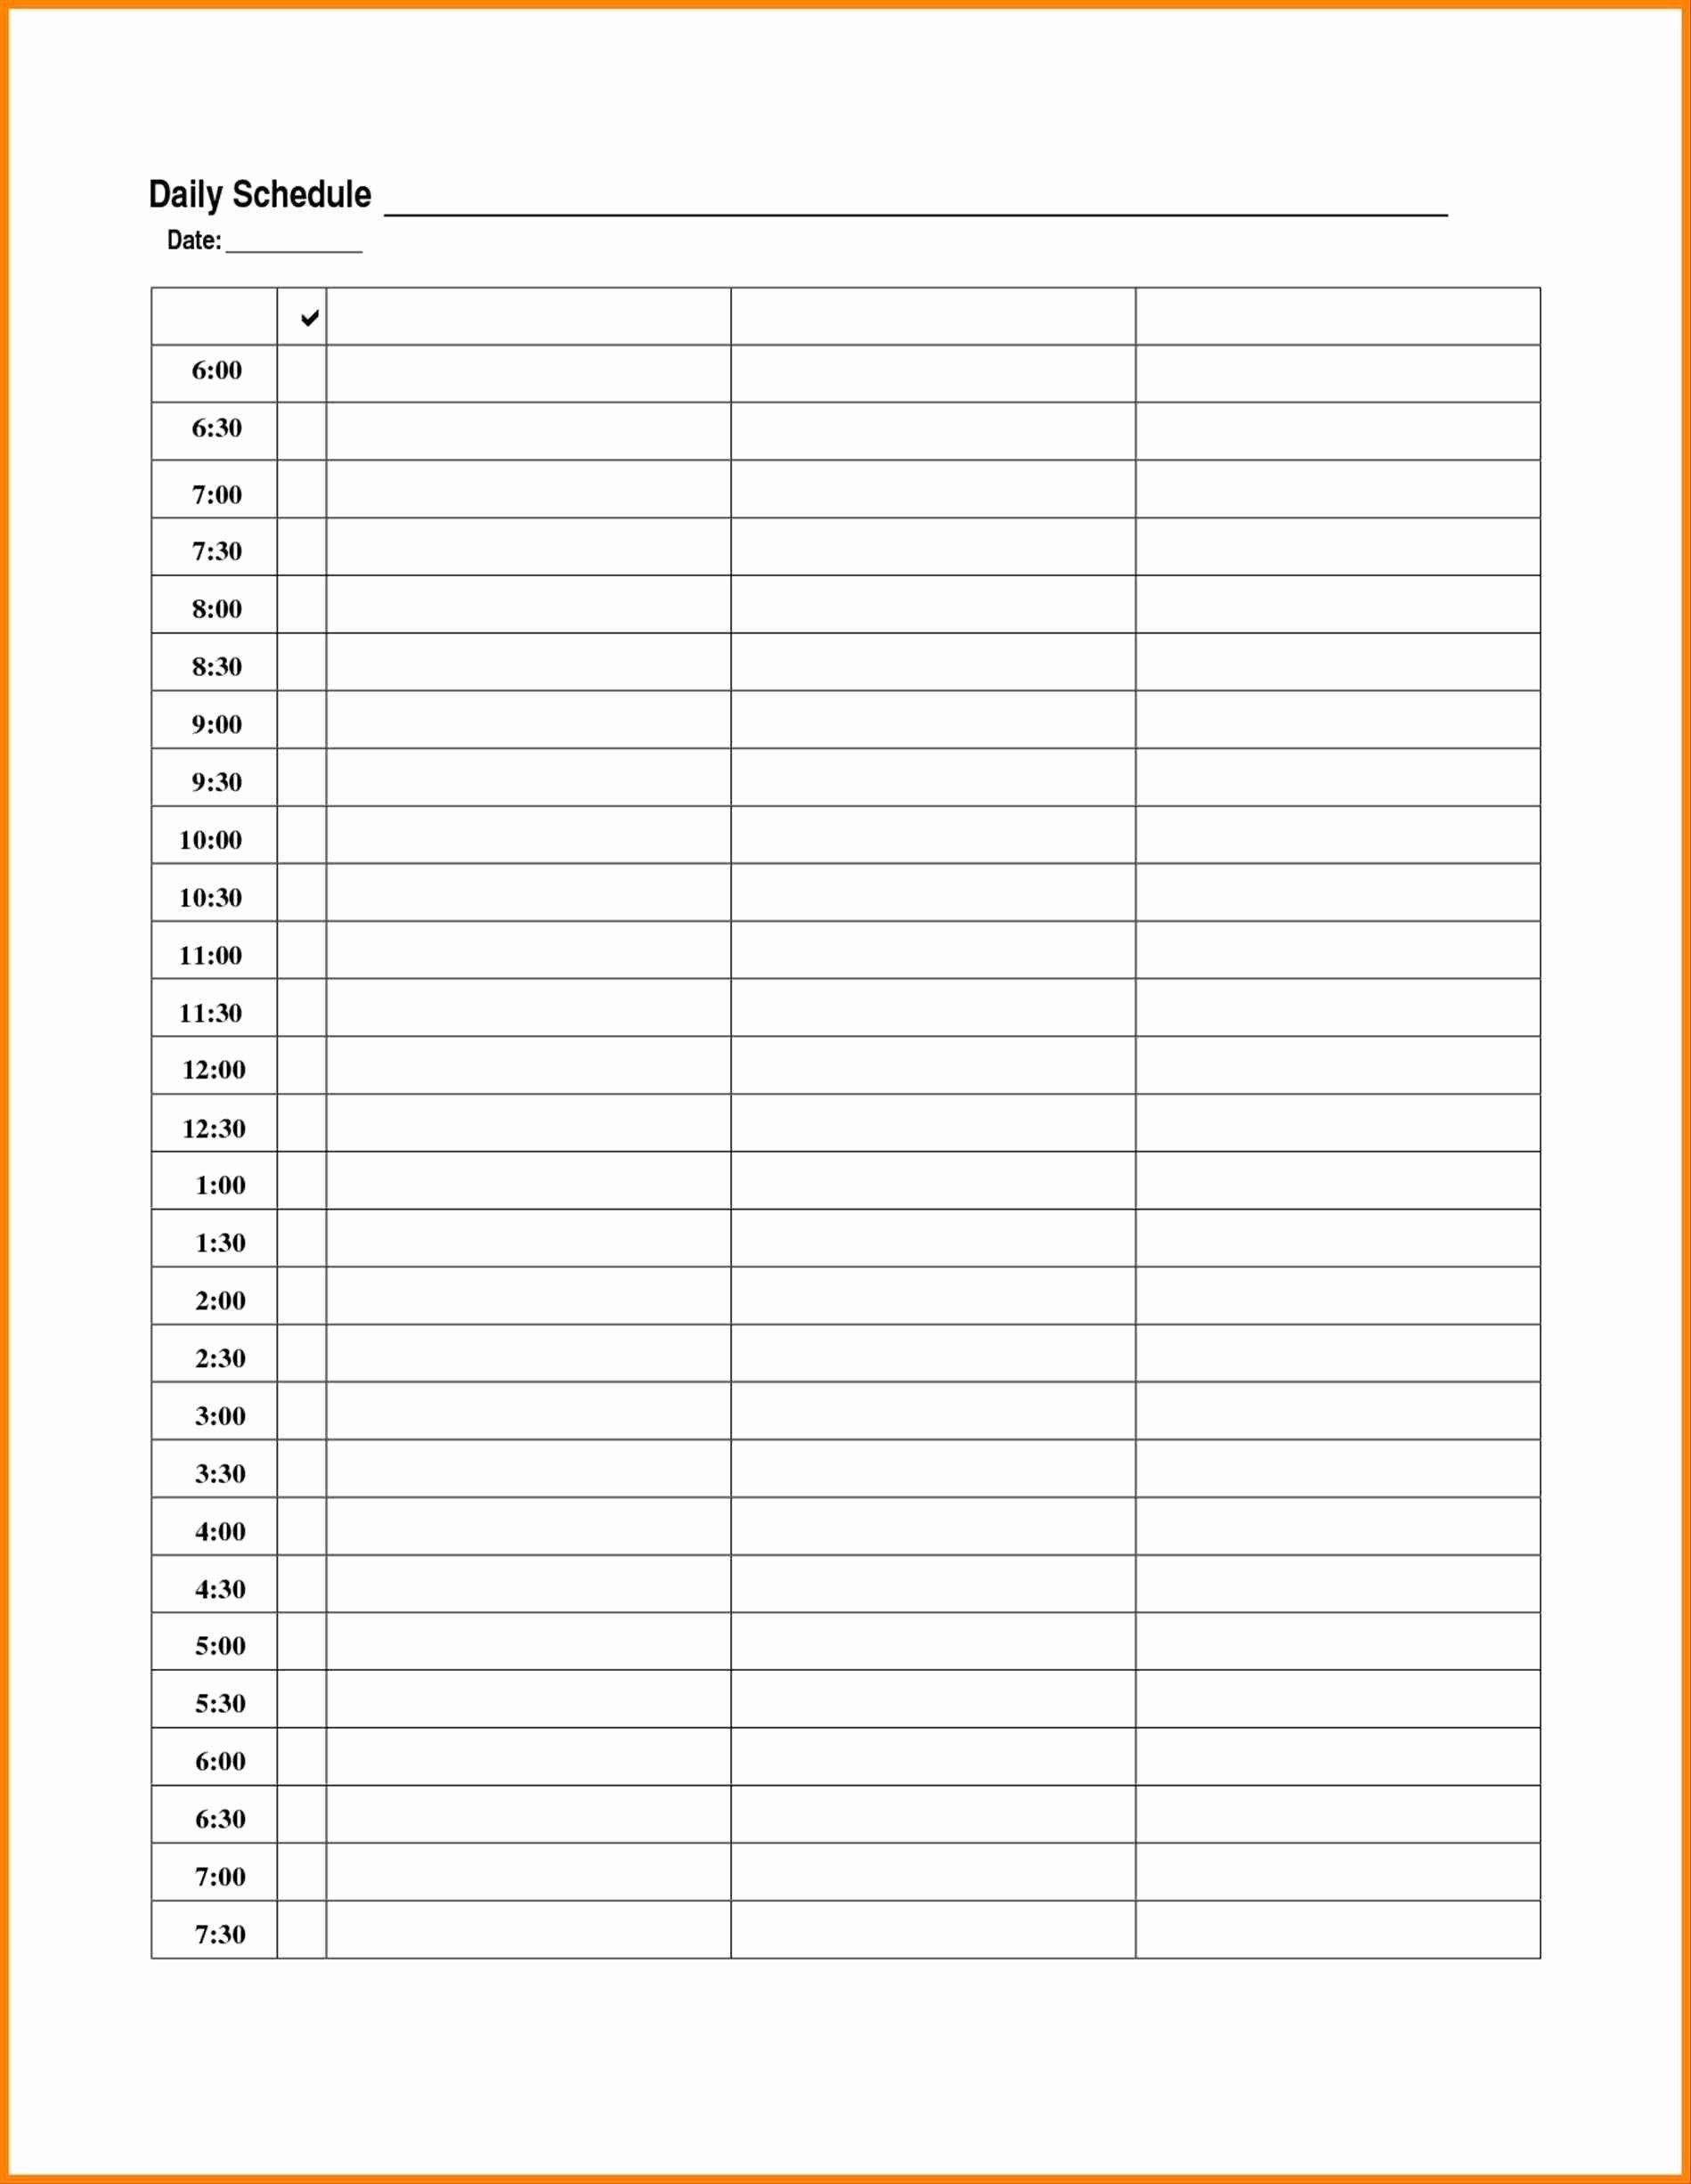 Daily Schedule Template Free Luxury Daily Calendar Excel Template Free Printable